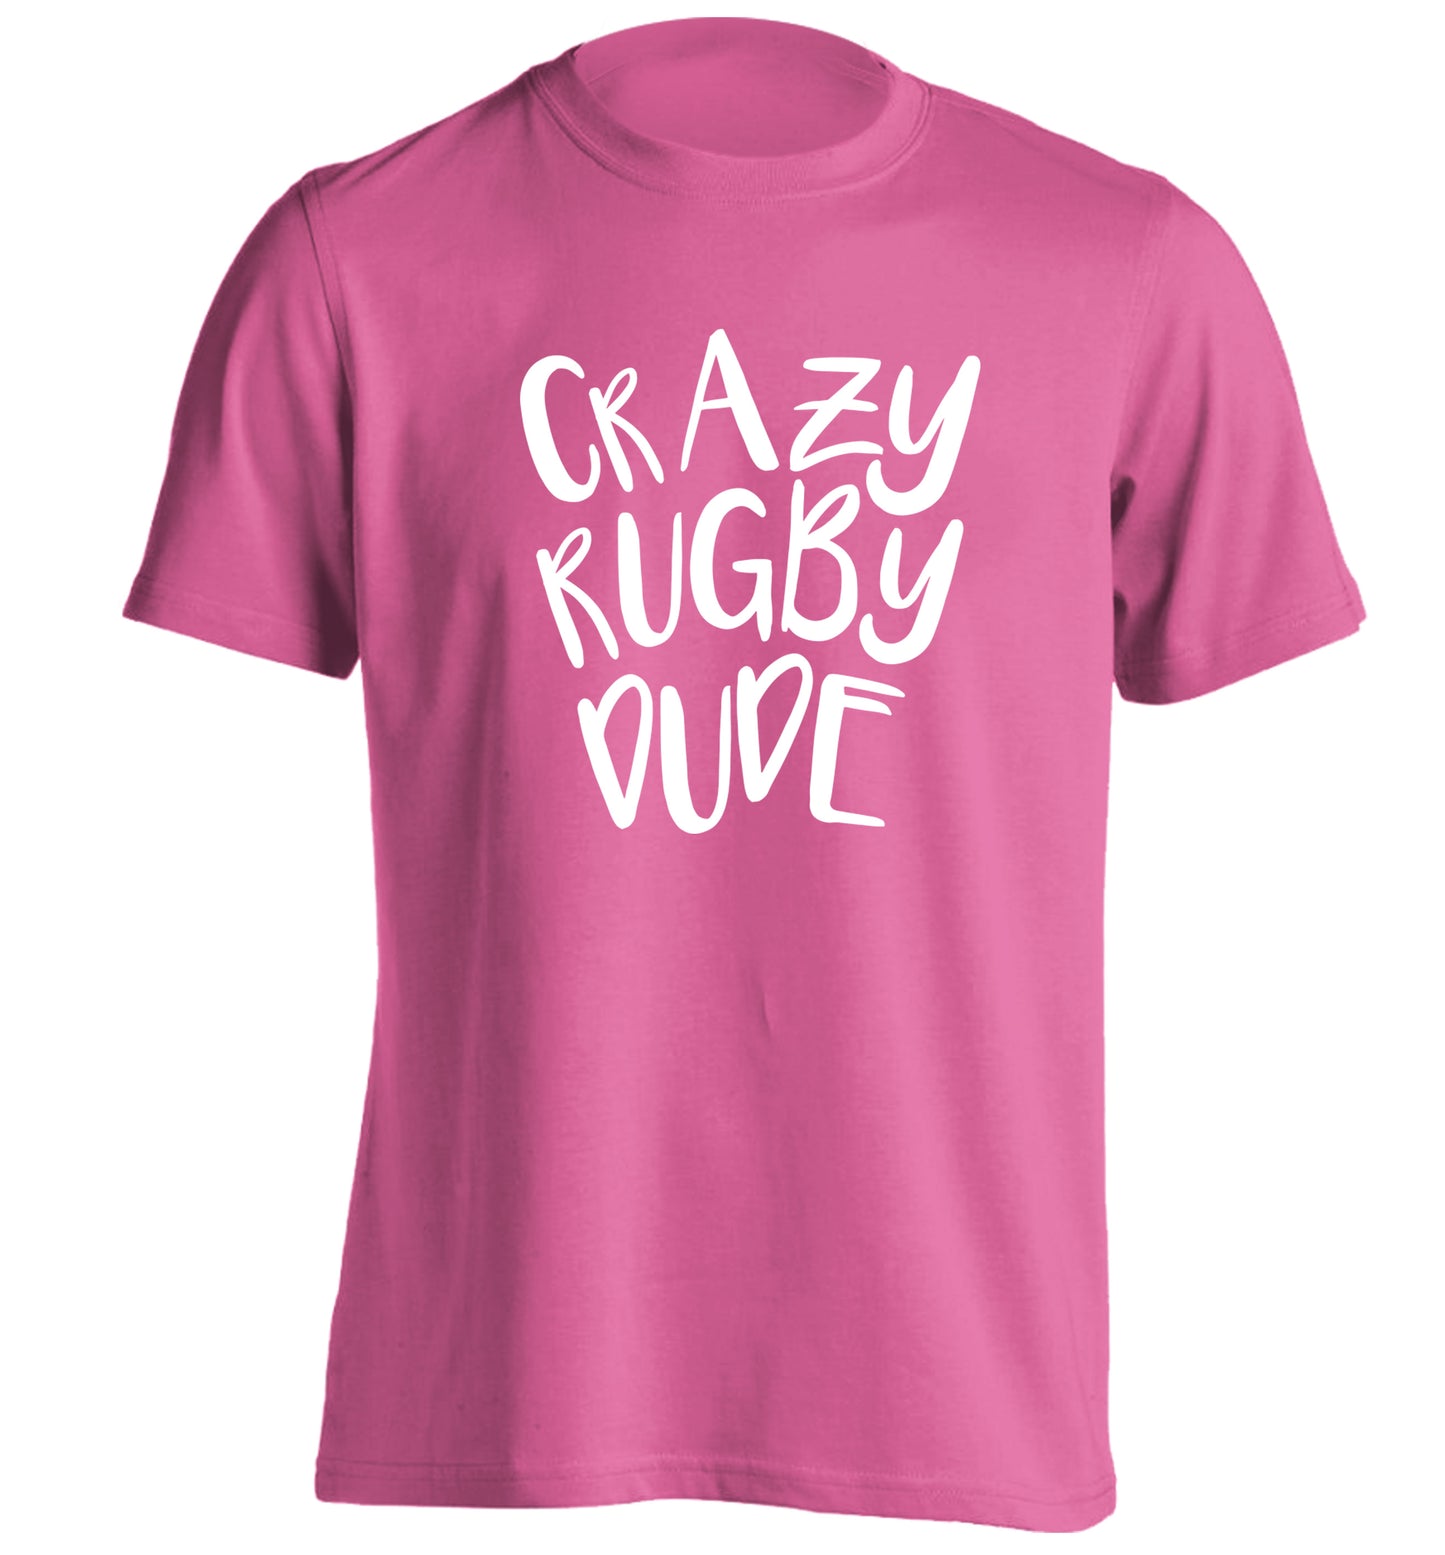 Crazy rugby dude adults unisex pink Tshirt 2XL